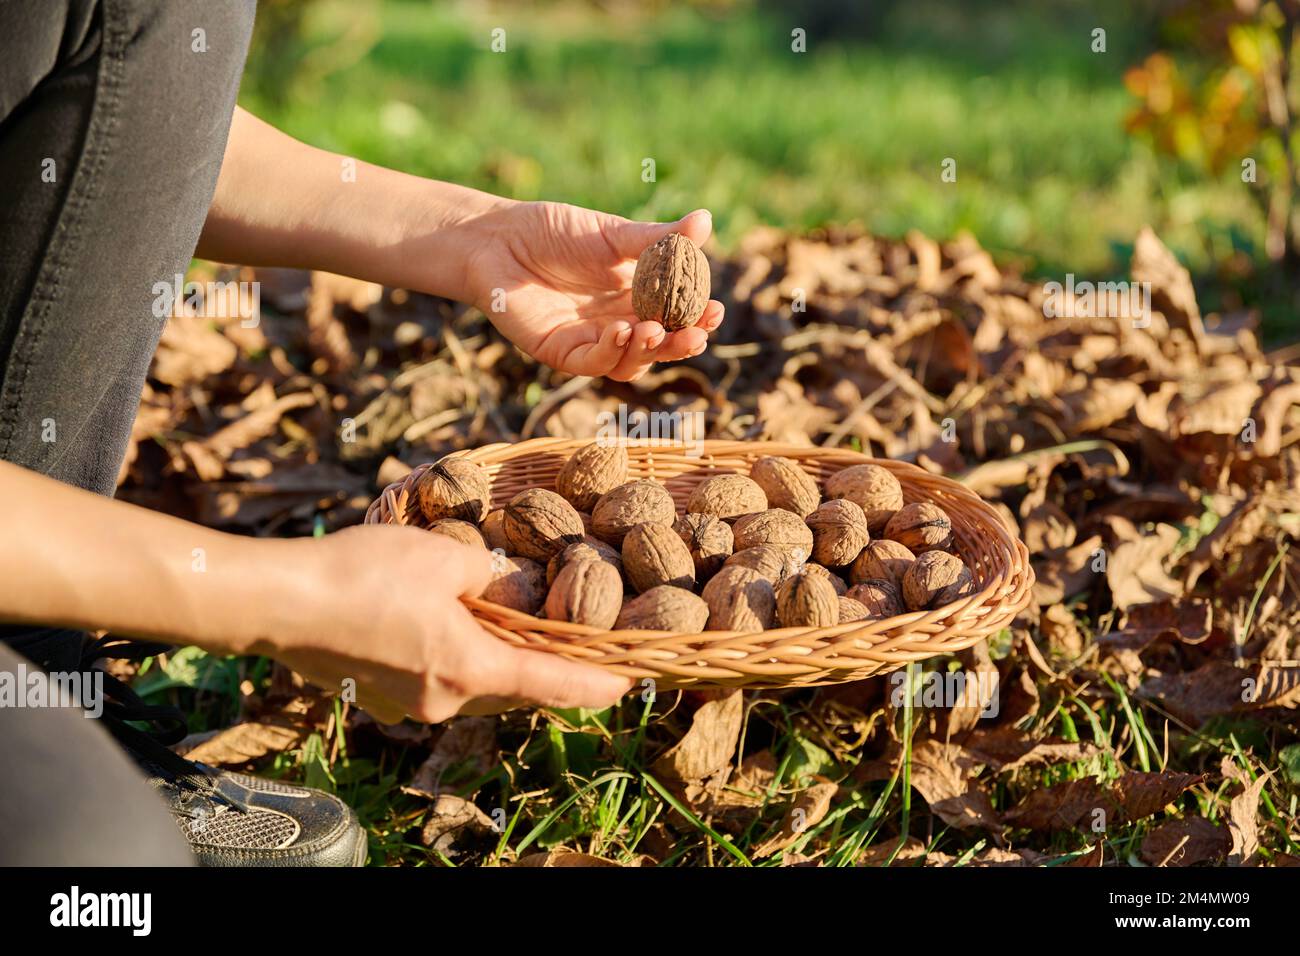 Close-up of ripe walnuts in hands of woman picking nuts in basket Stock Photo